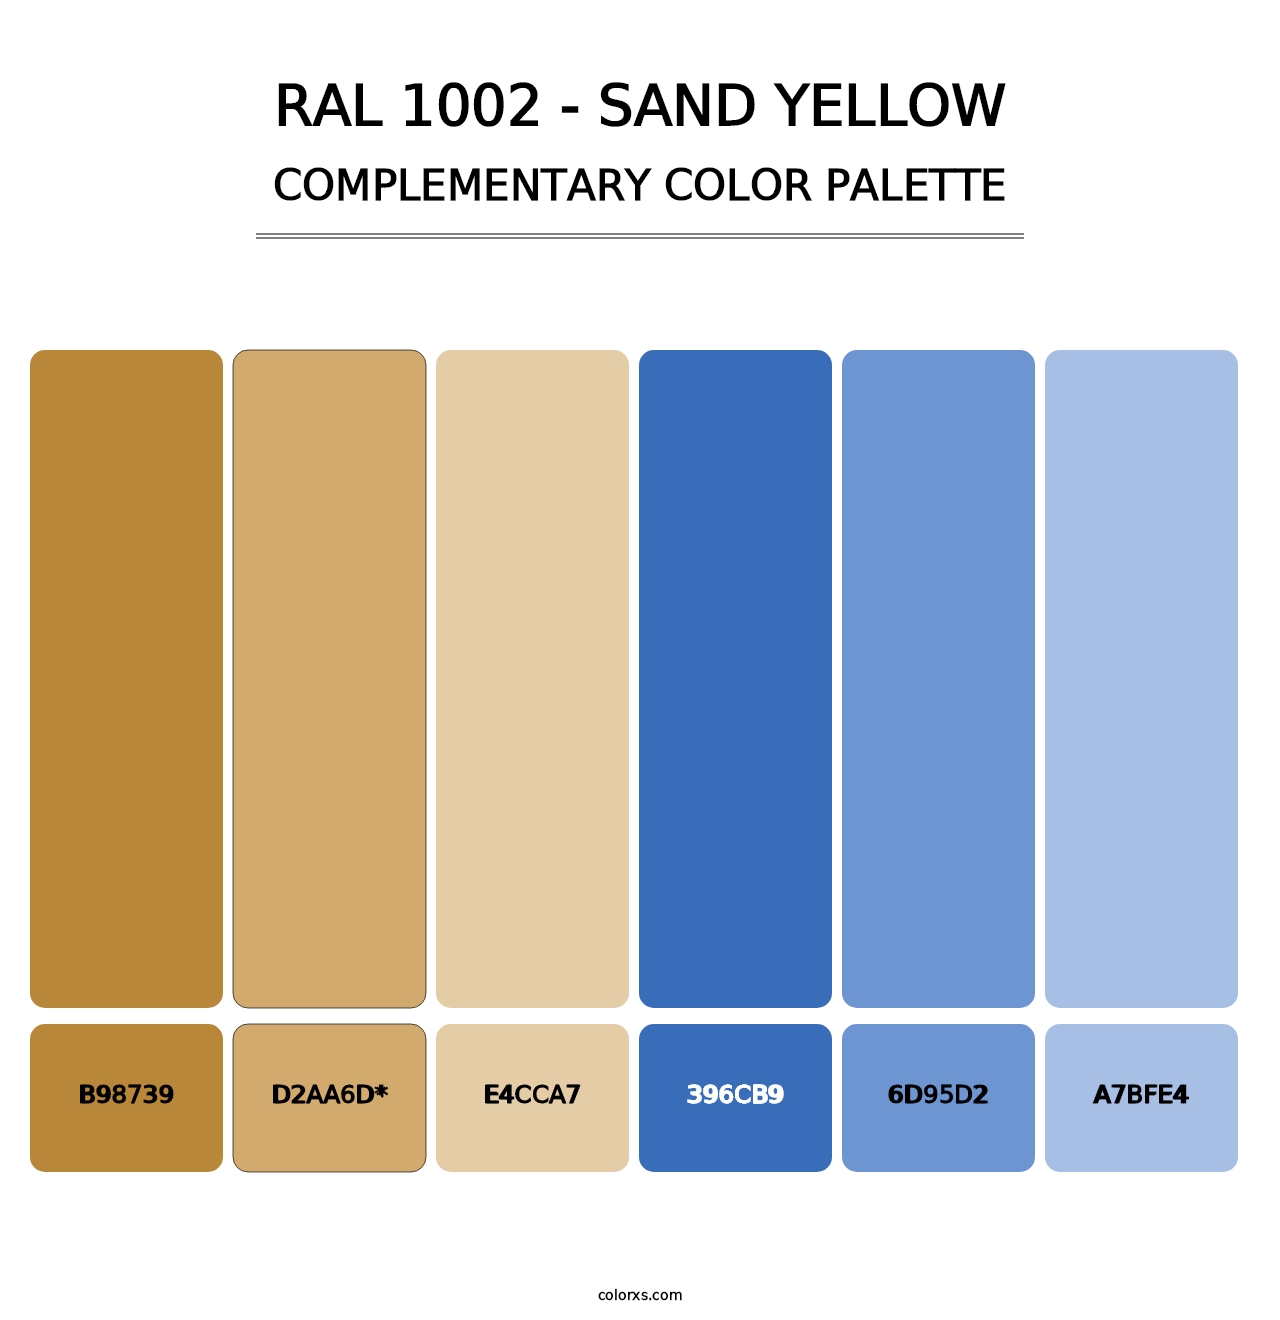 RAL 1002 - Sand Yellow - Complementary Color Palette